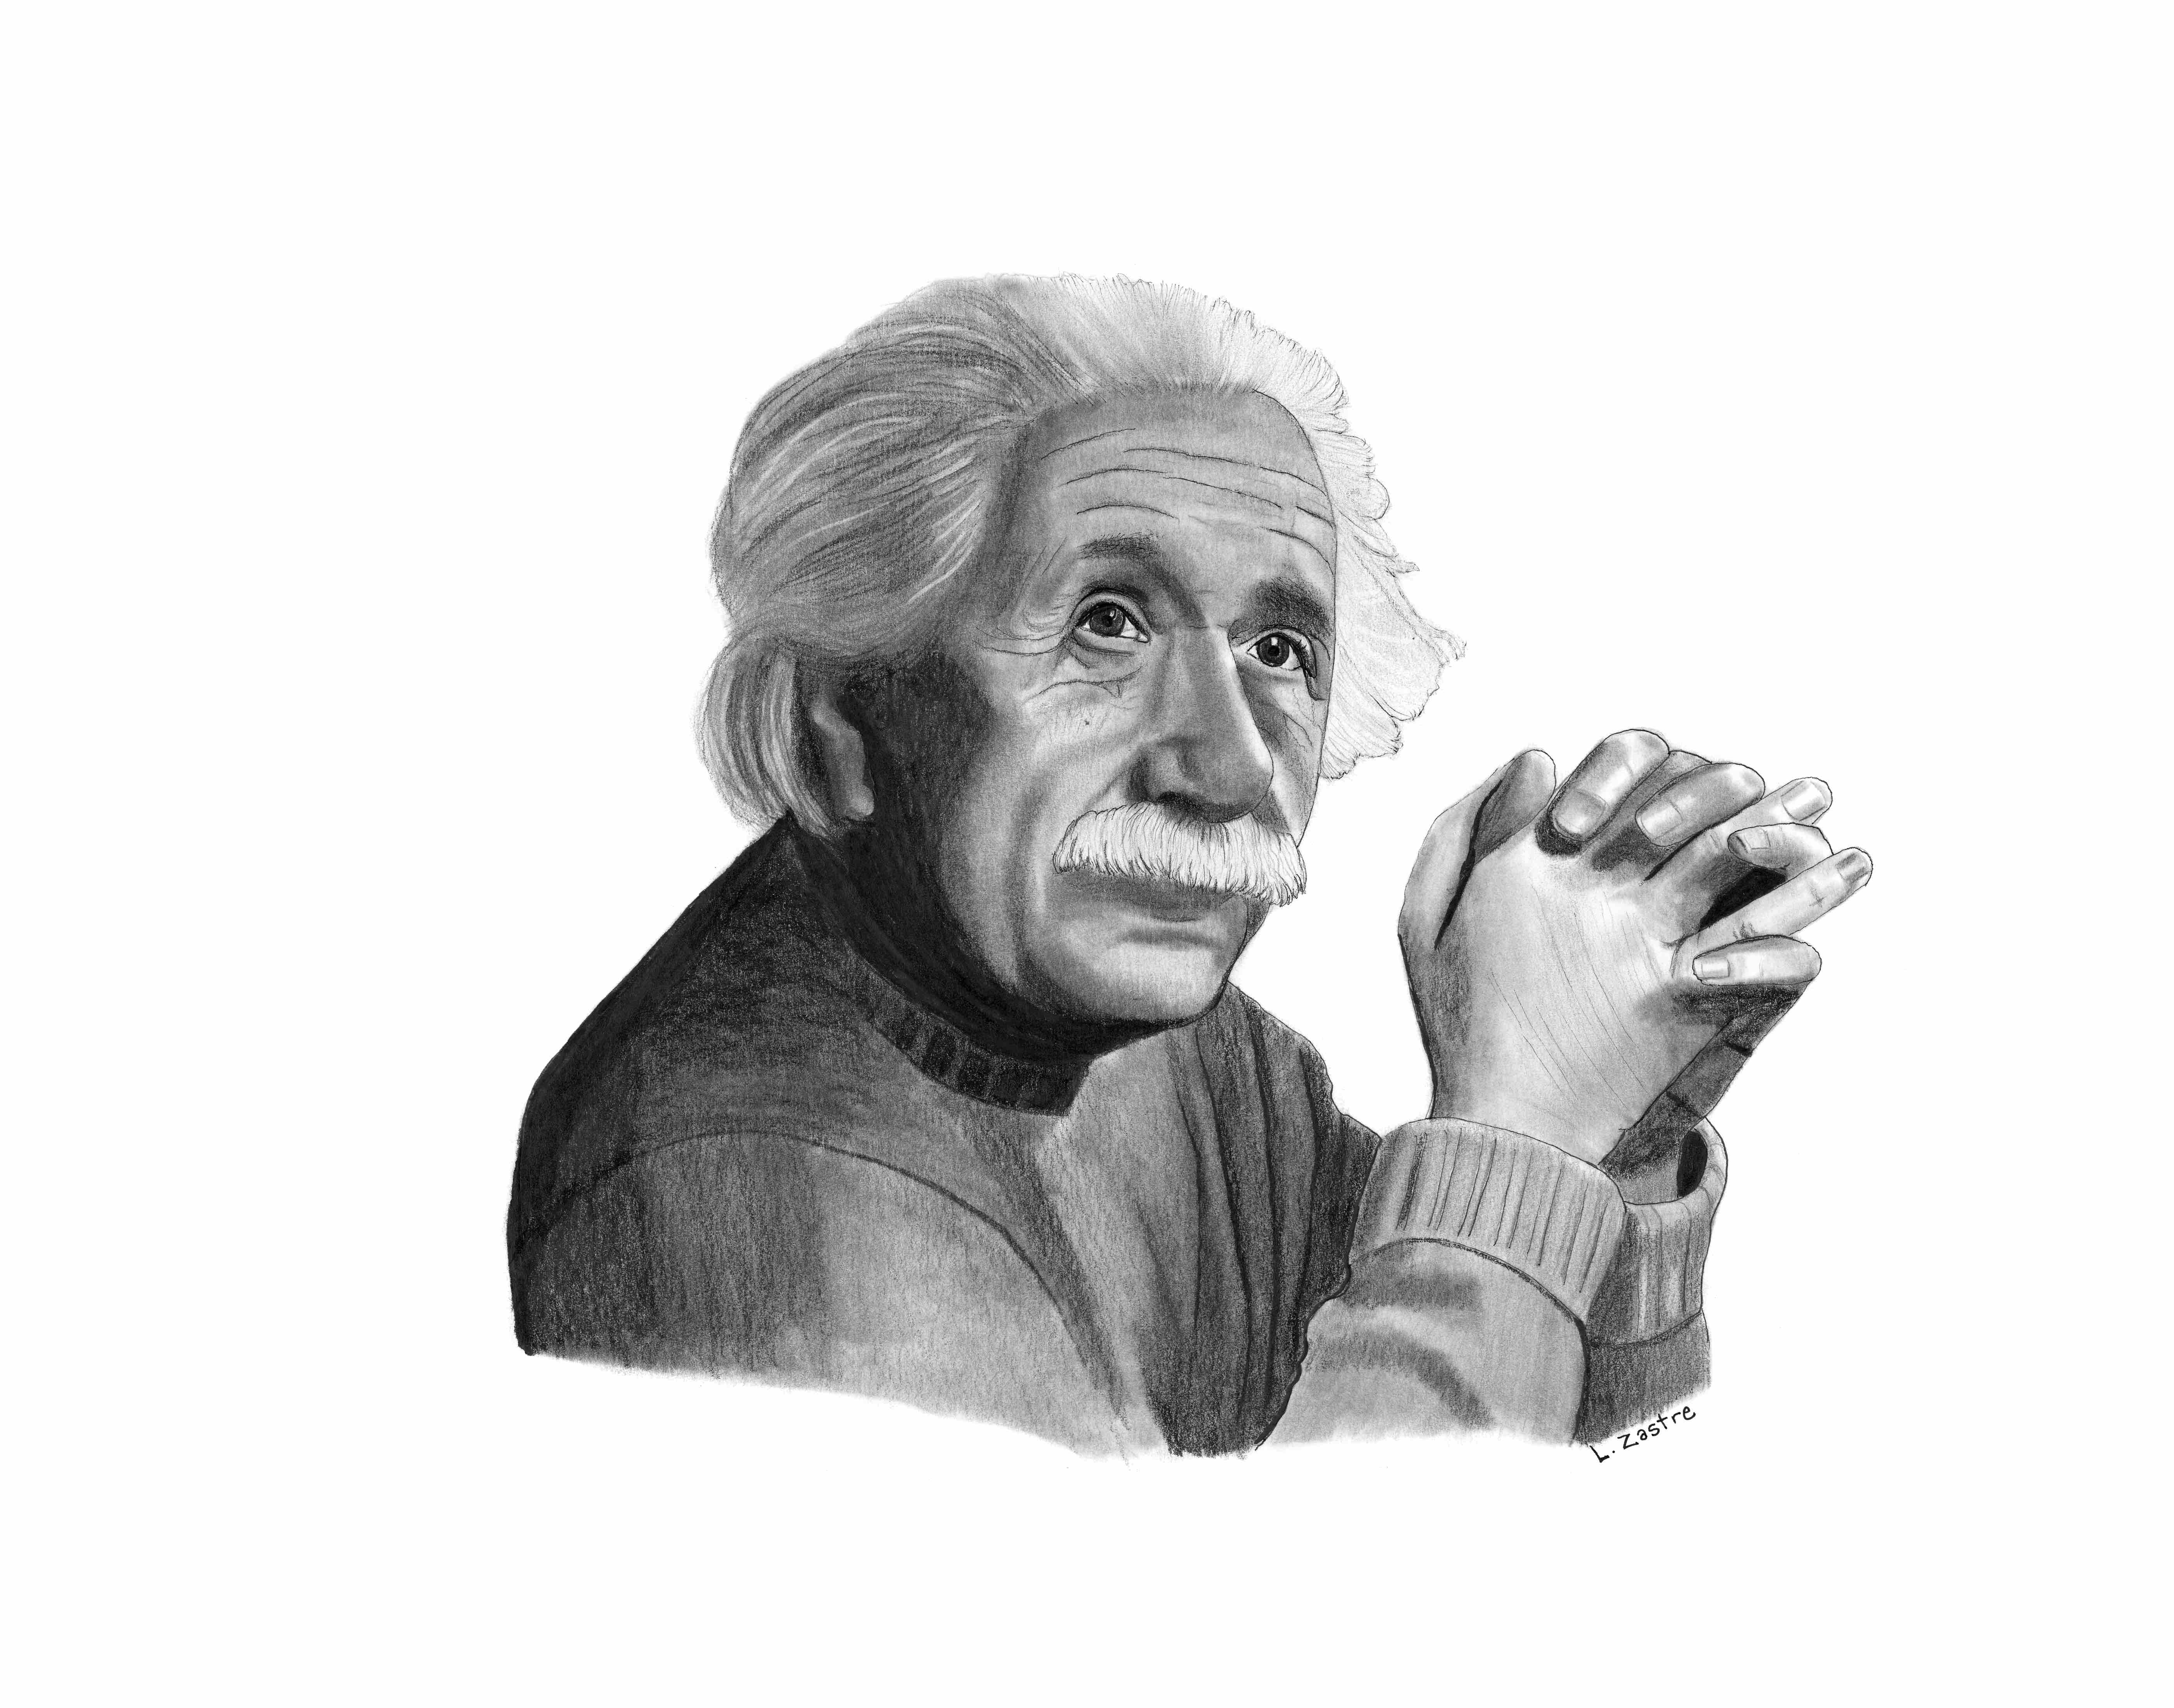 This is a drawing of an elderly Einstein. He is wearing a sweater. His hair is white and bushy, as is his moustache. His hands are clasped in front of him. He looks up and to the side, lost in thought.